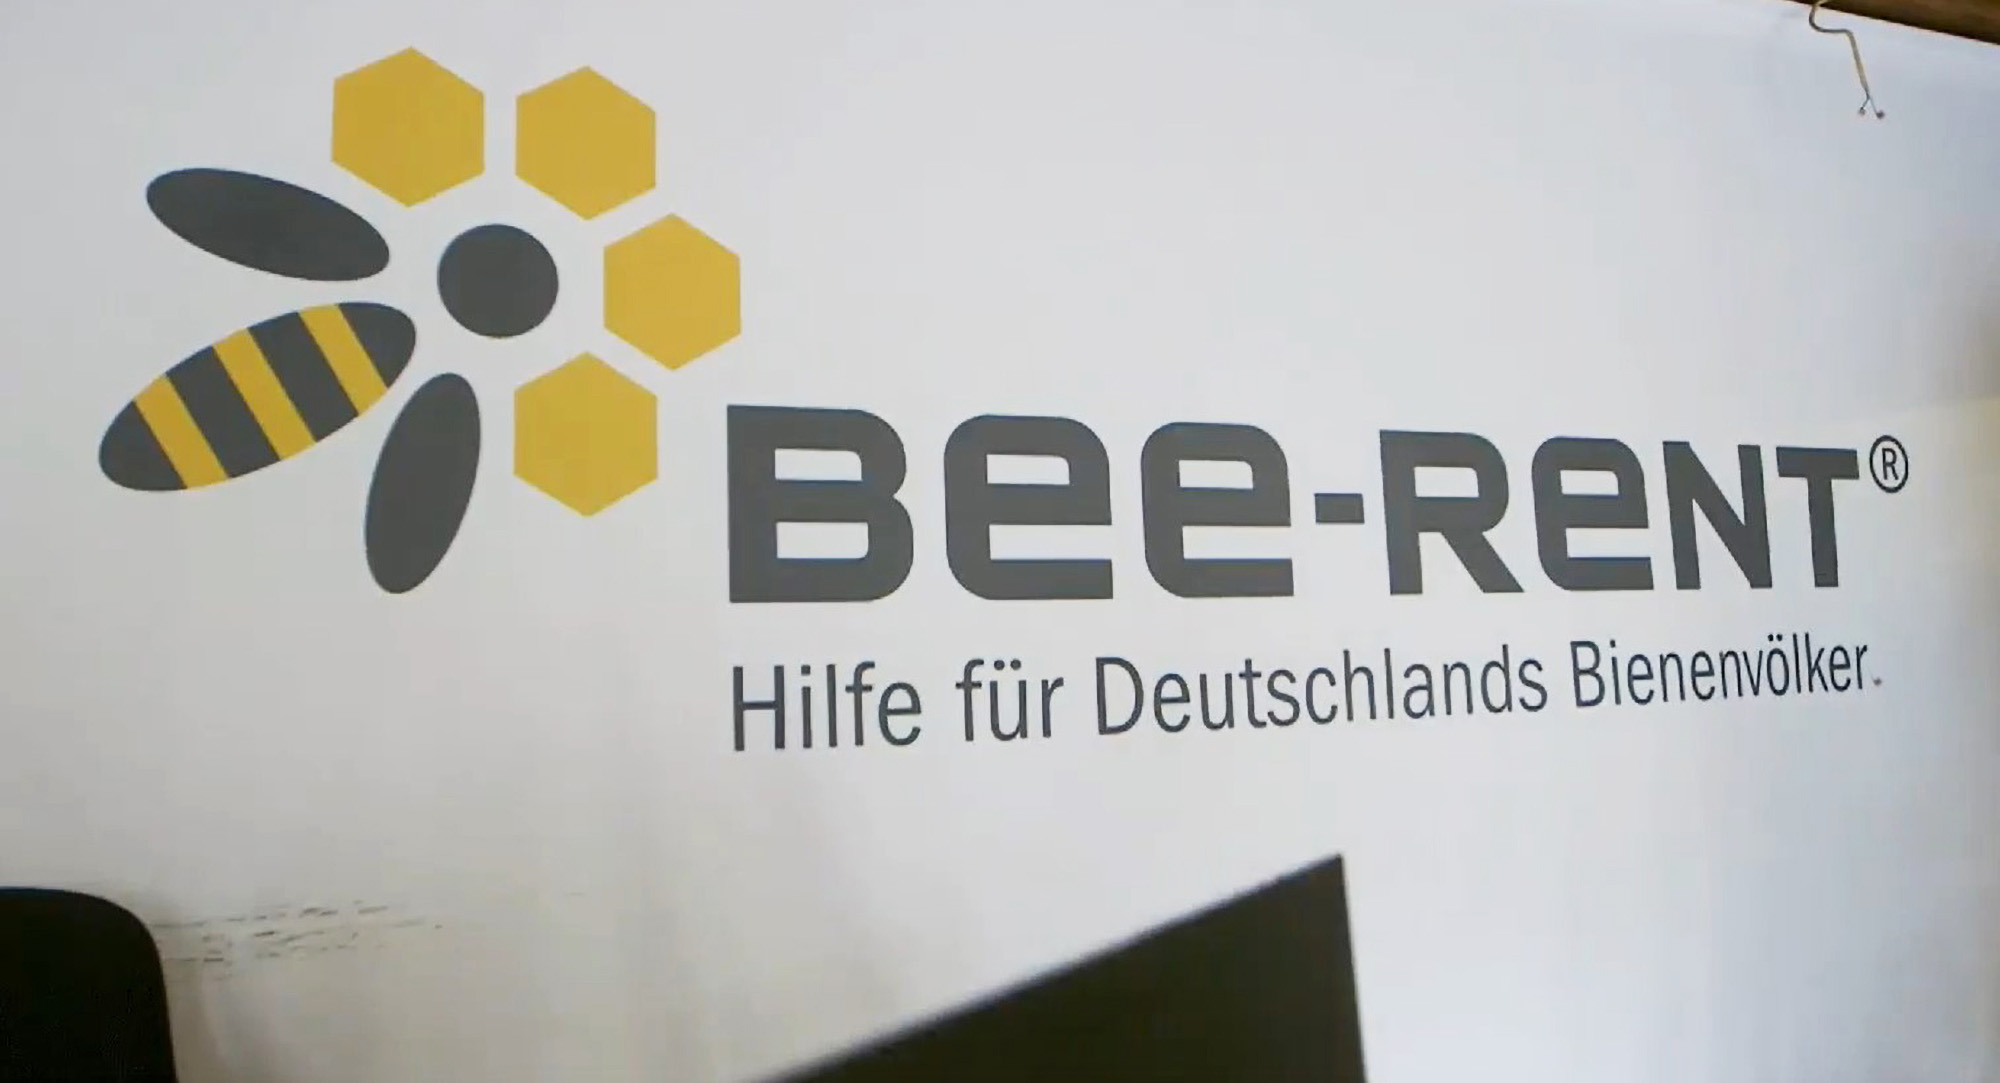 Hive Rental ‘Enables You To Experience Bees…